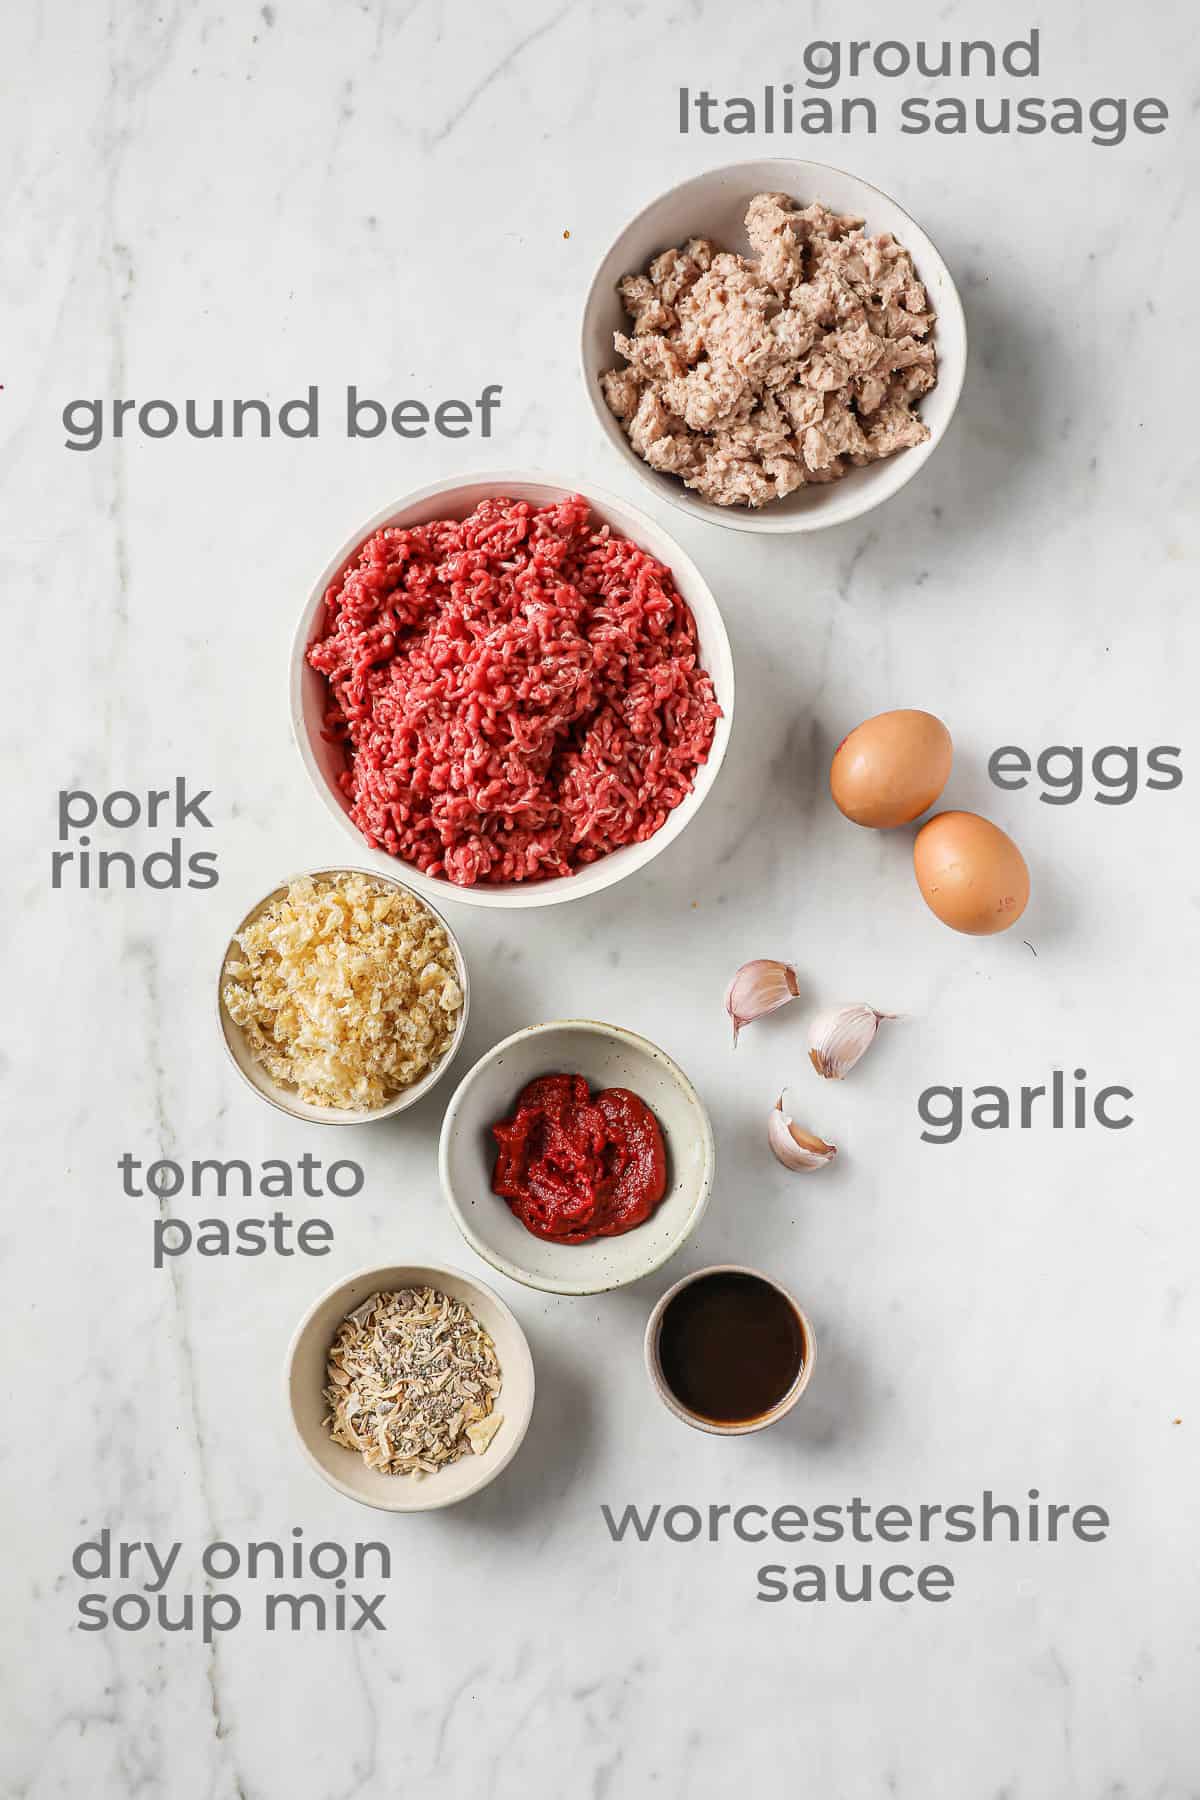 ingredients for meatloaf - beef, sausage, tomato paste, eggs, onion soup, garlic